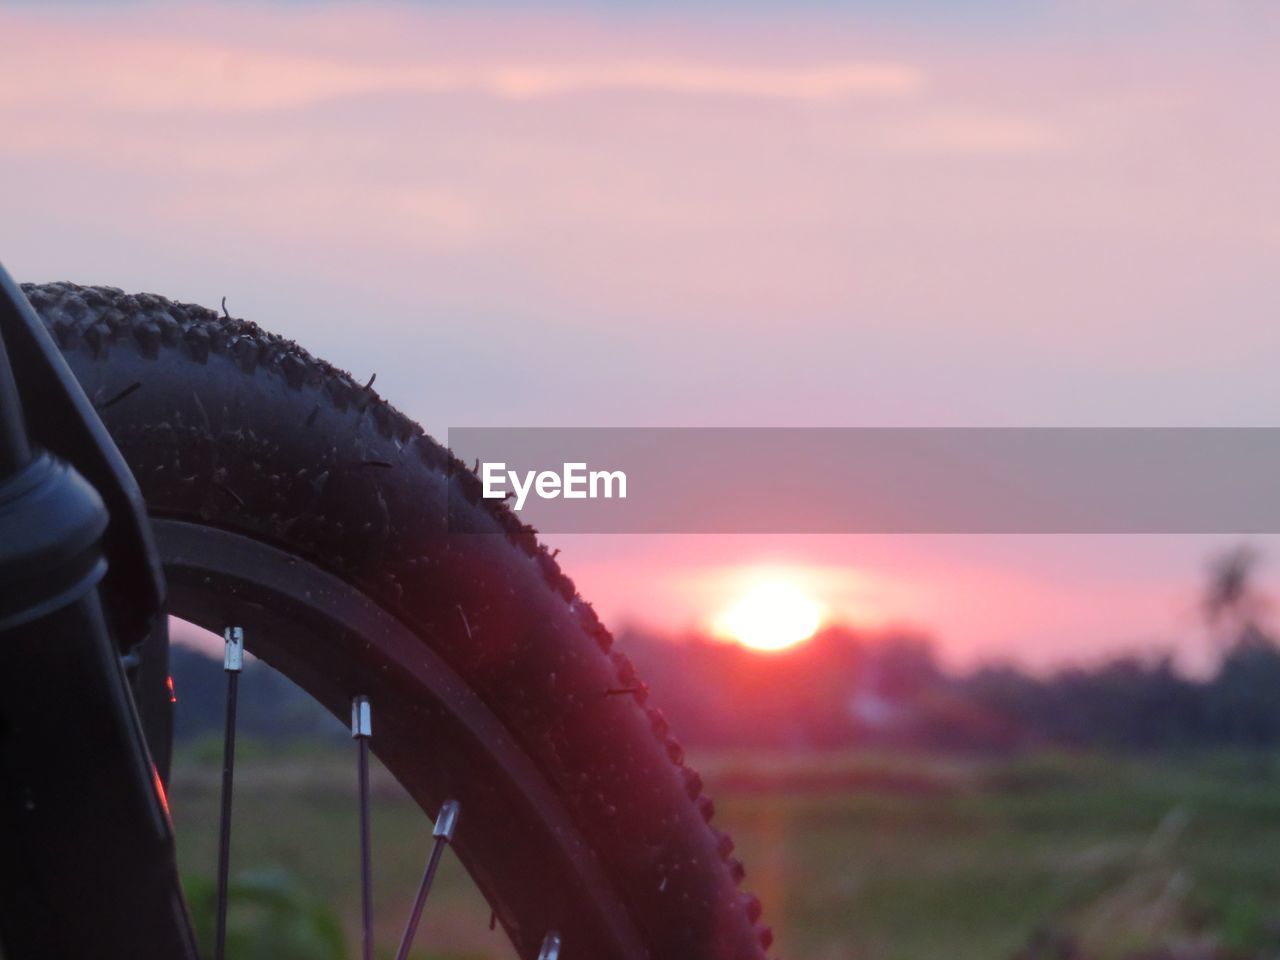 CLOSE-UP OF TIRE AGAINST SUNSET SKY